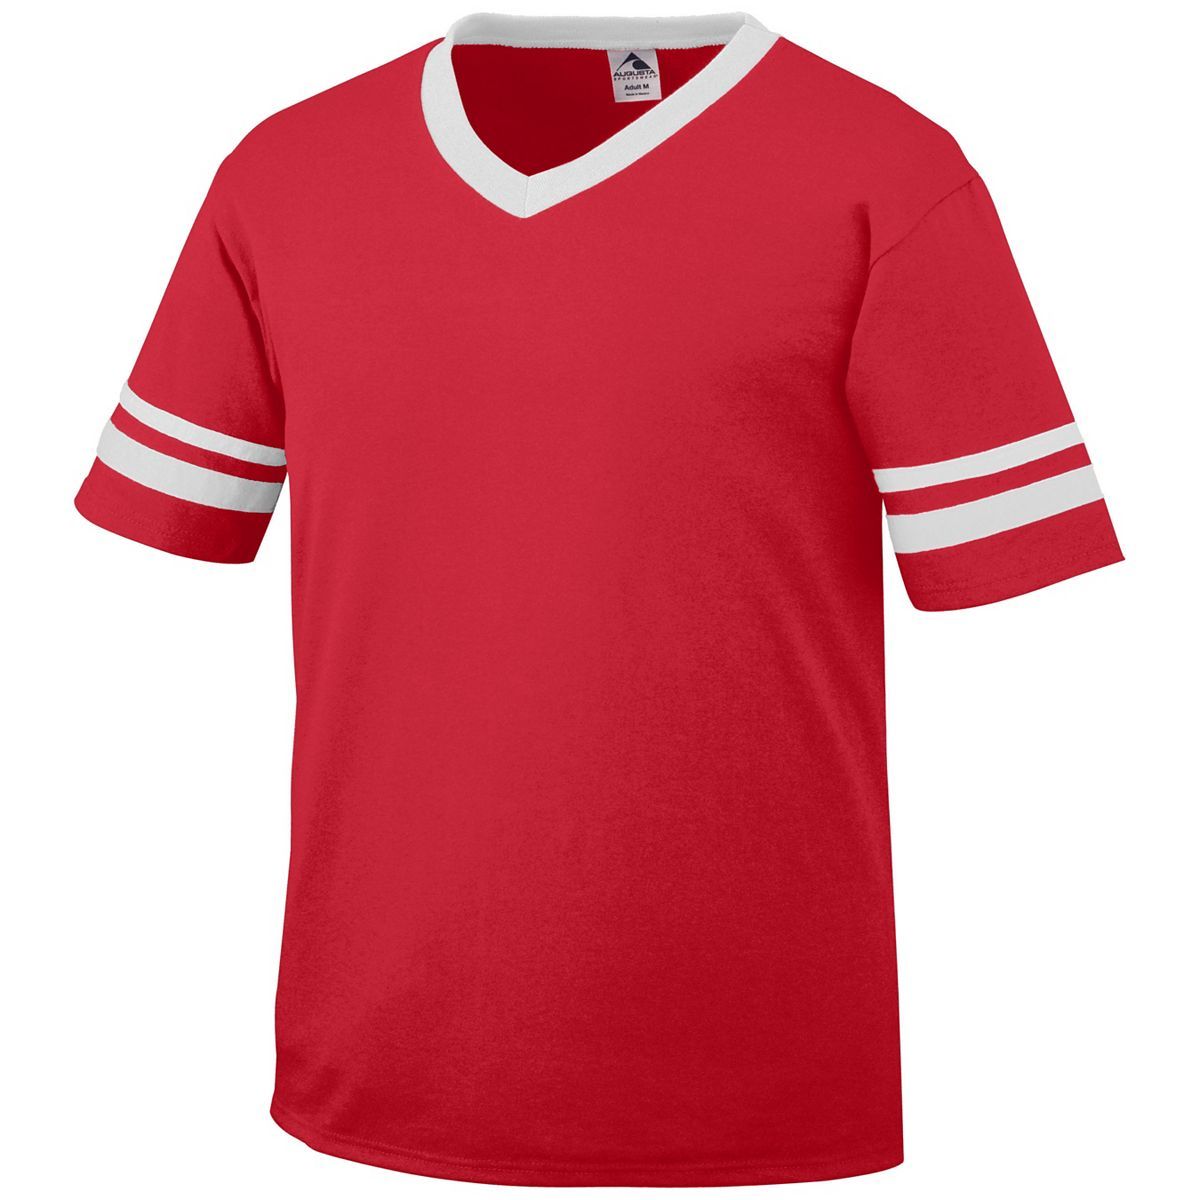 Augusta Sportswear Youth Sleeve Stripe Jersey in Red/White  -Part of the Youth, Youth-Jersey, Augusta-Products, Shirts product lines at KanaleyCreations.com